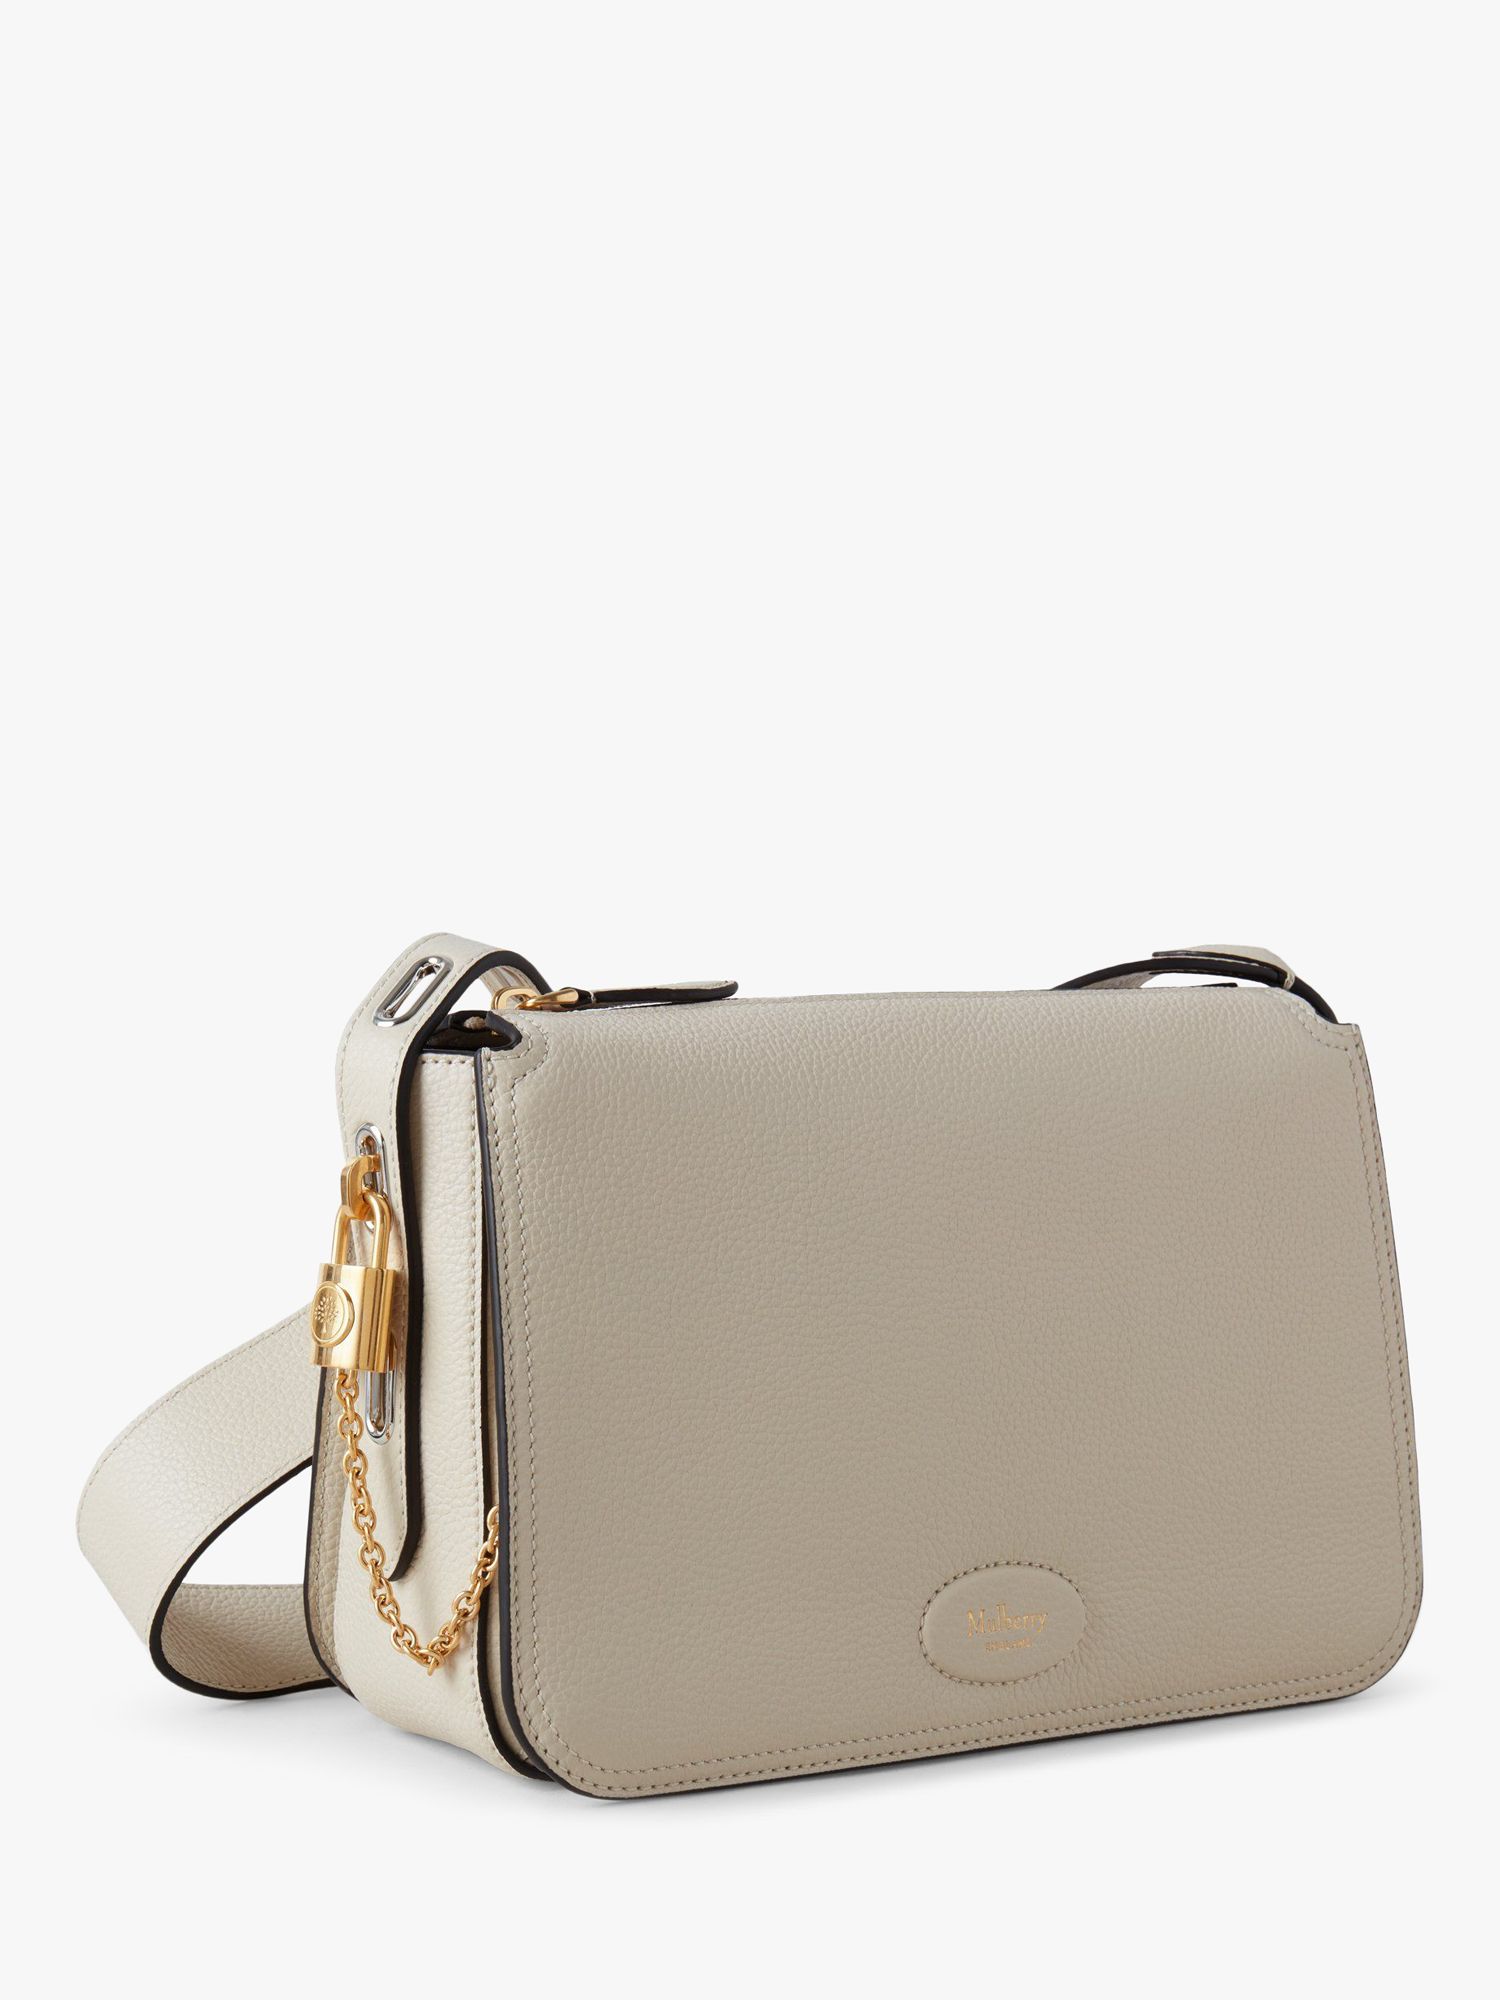 Mulberry Billie Small Classic Grain Leather Cross Body Bag, Chalk at ...